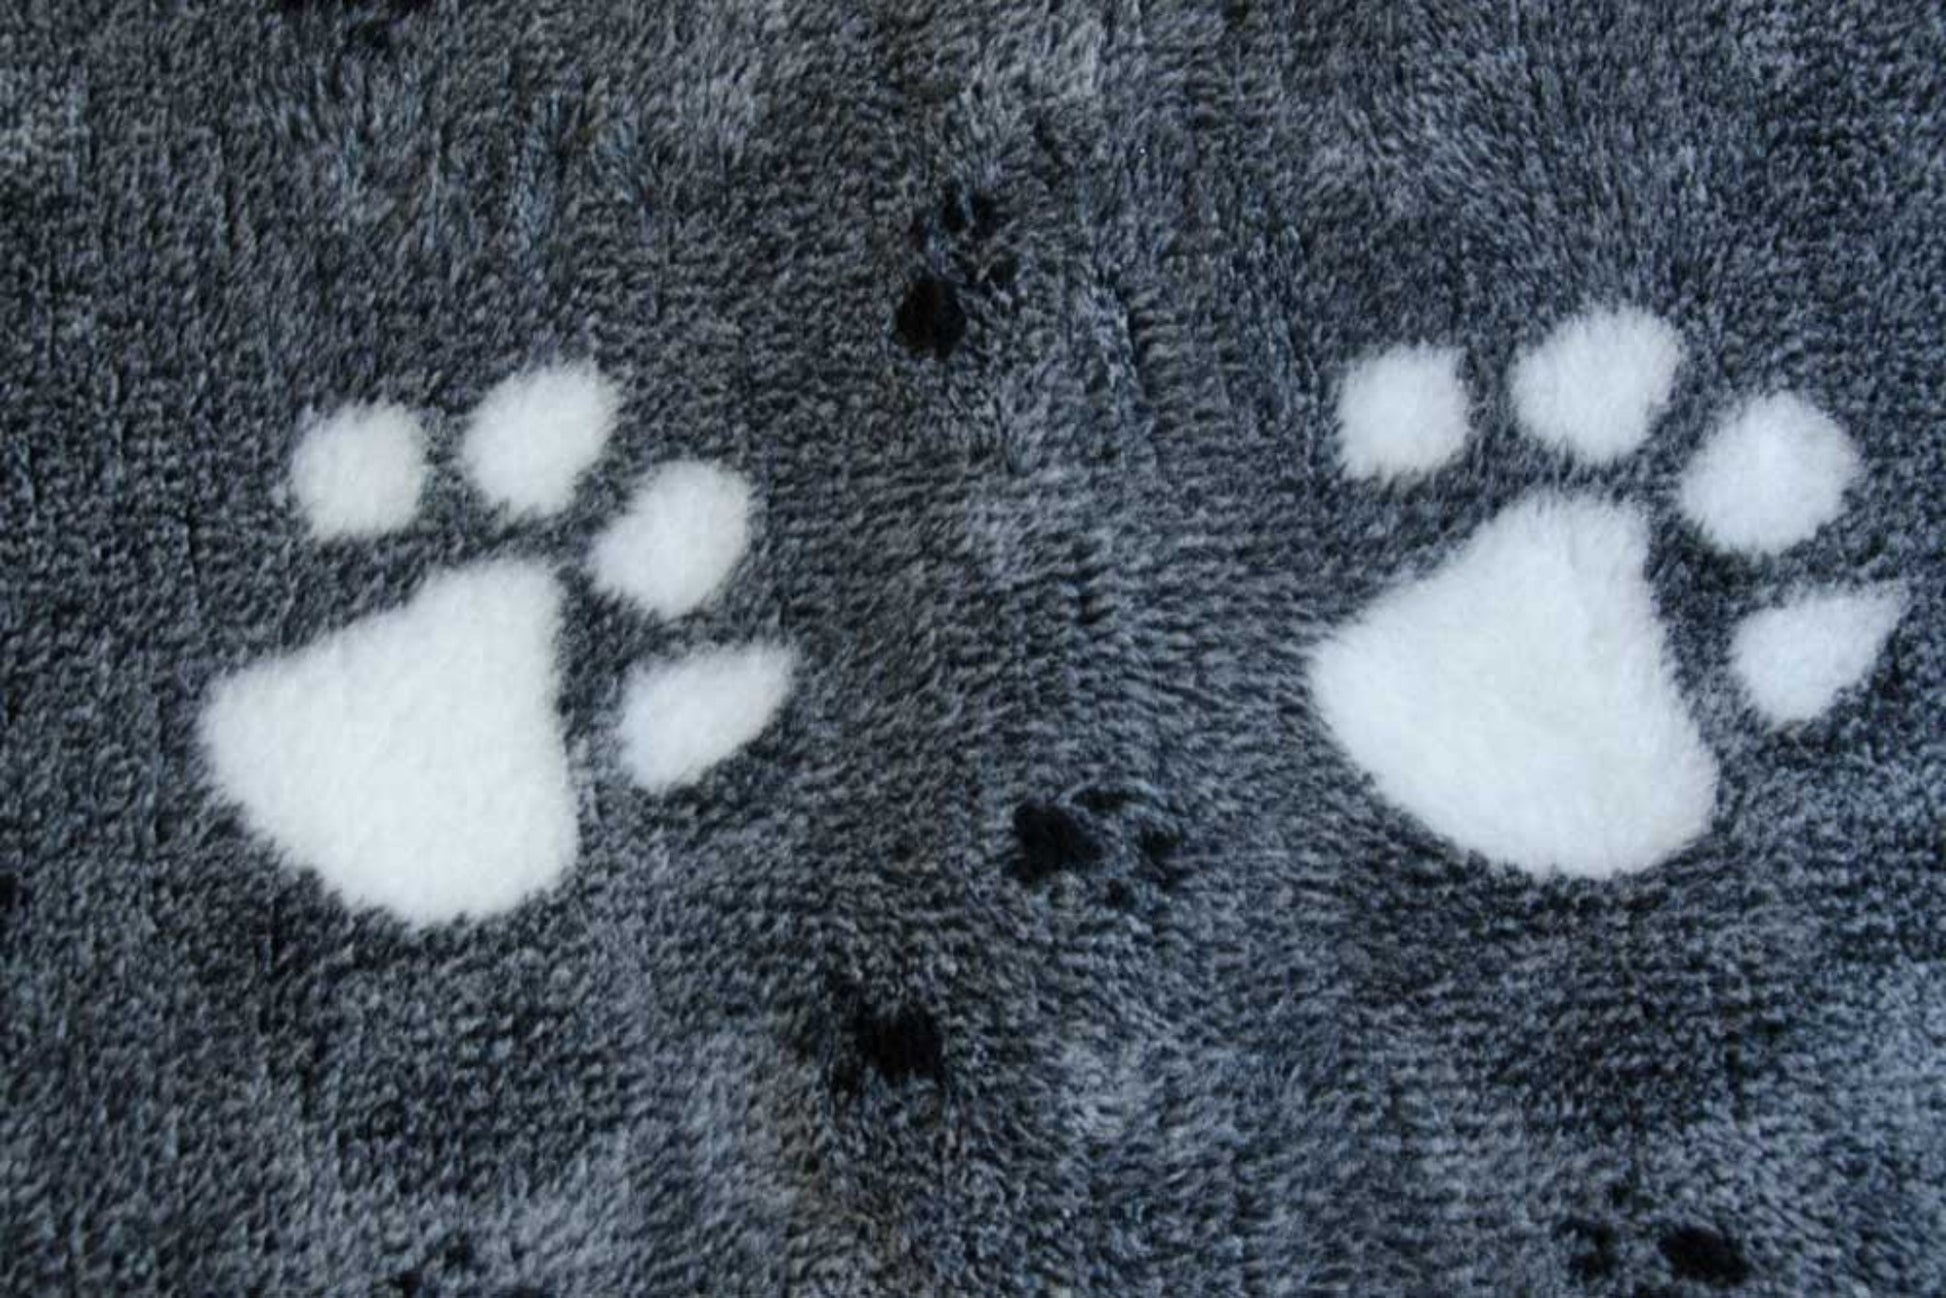 VET BED - GREEN BACKED - CHARCOAL/BLACK WITH LARGE WHITE PAWS/SMALL BLACK PAWS